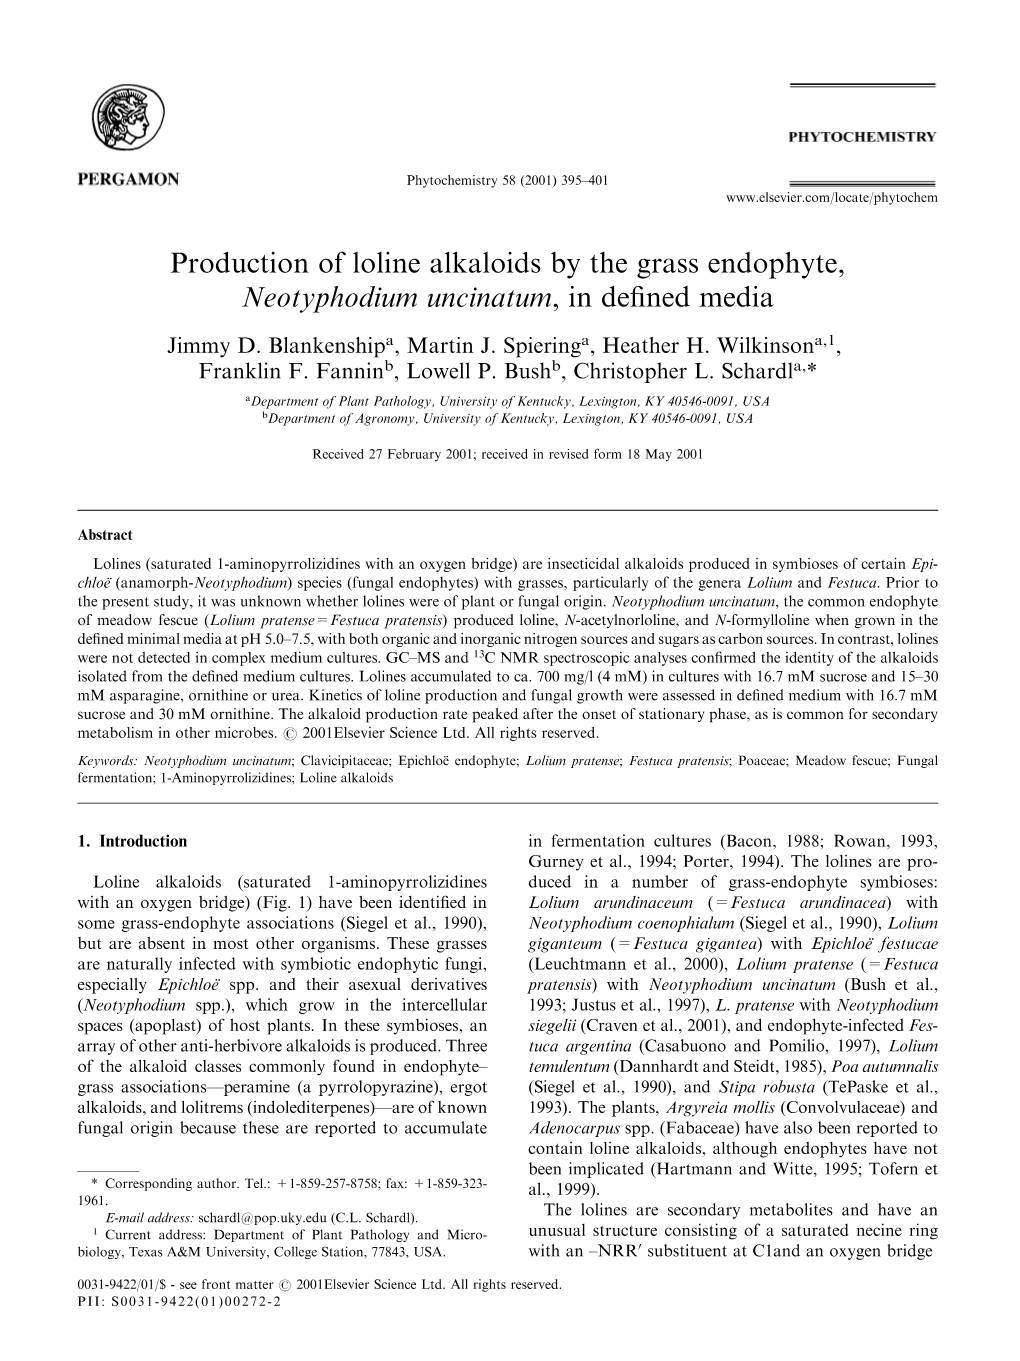 Production of Loline Alkaloids by the Grass Endophyte, Neotyphodium Uncinatum, in Deﬁned Media